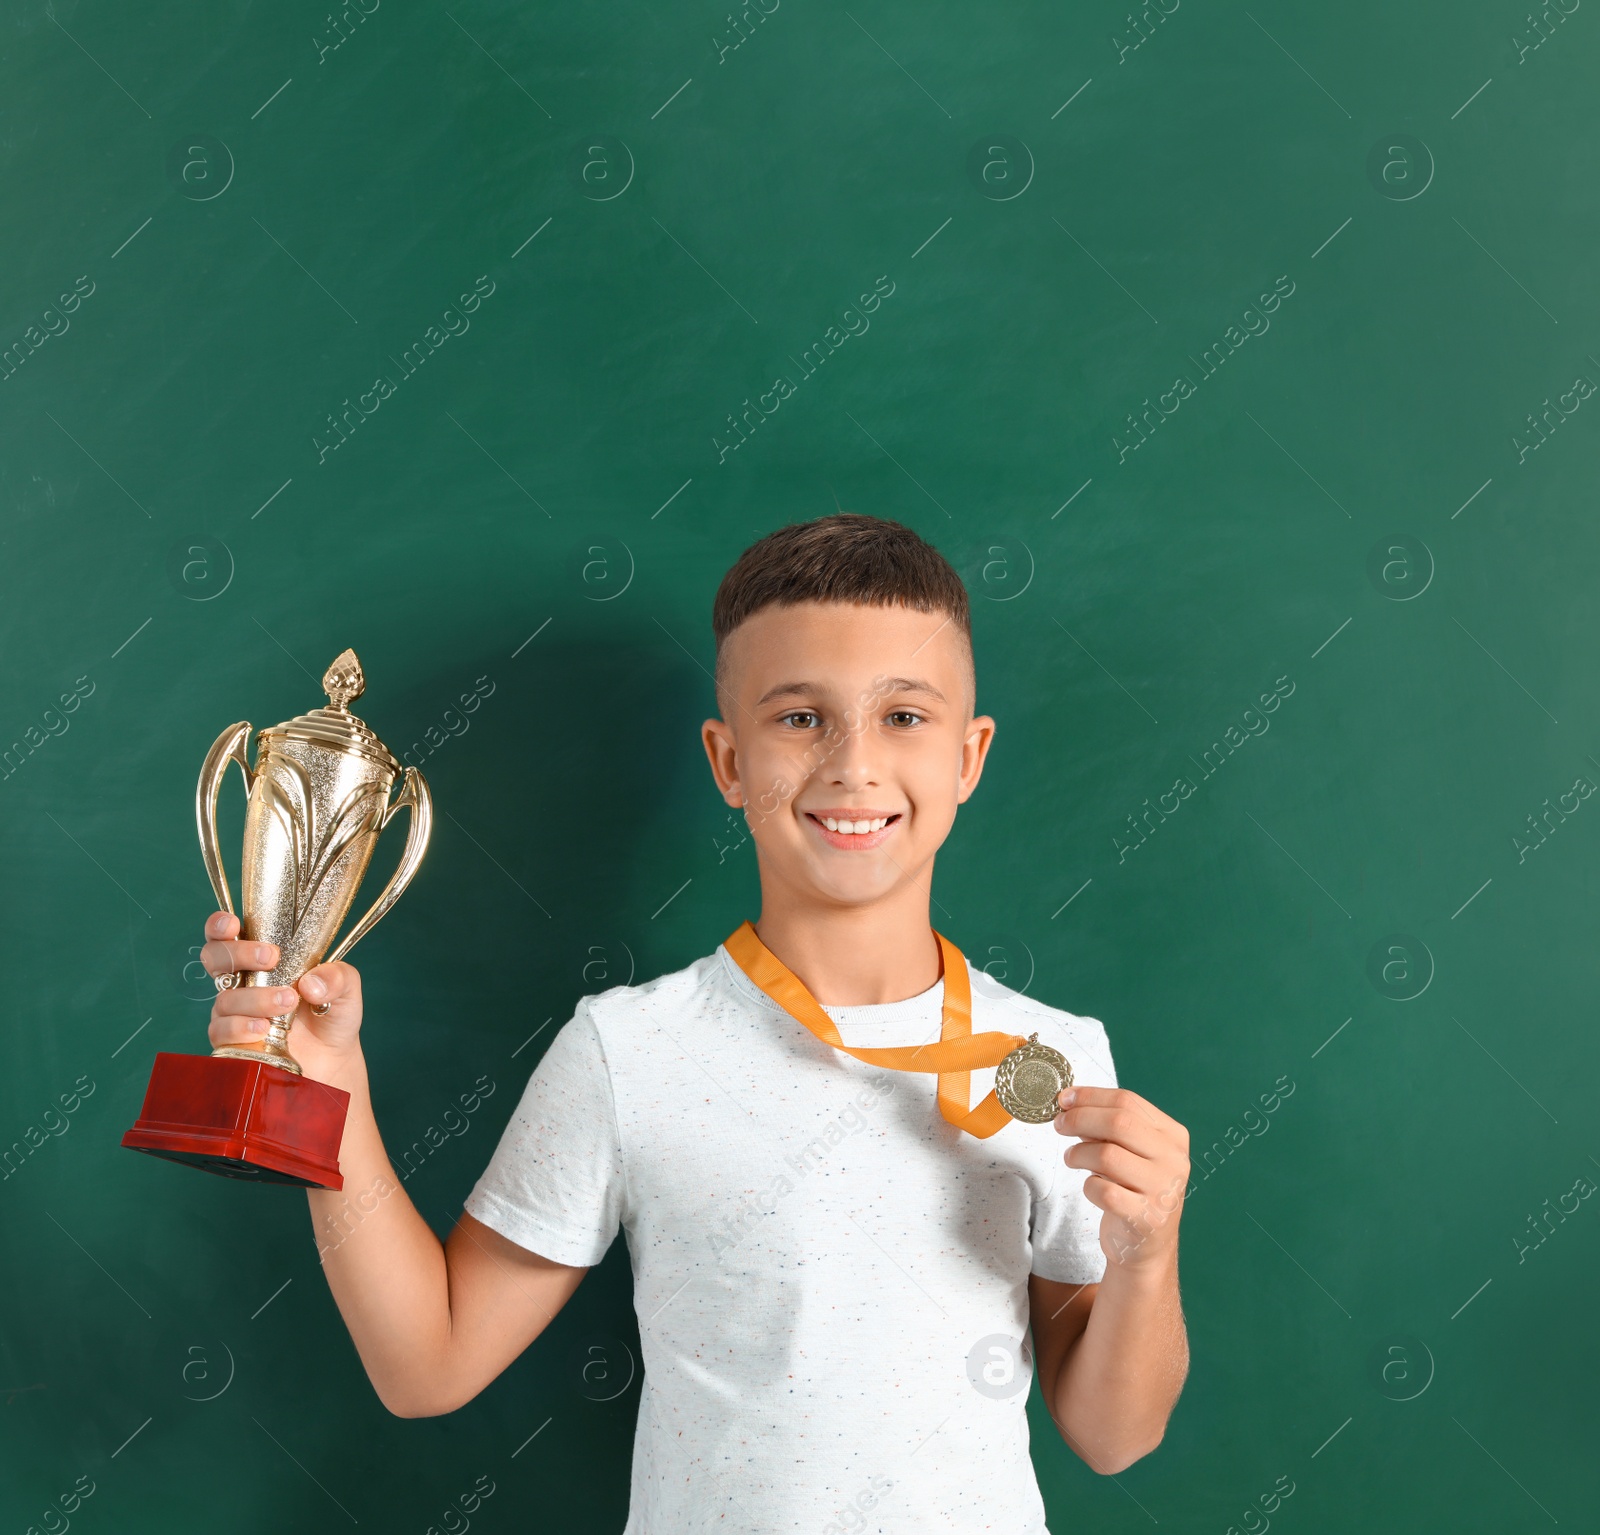 Photo of Happy boy with golden winning cup and medal near chalkboard